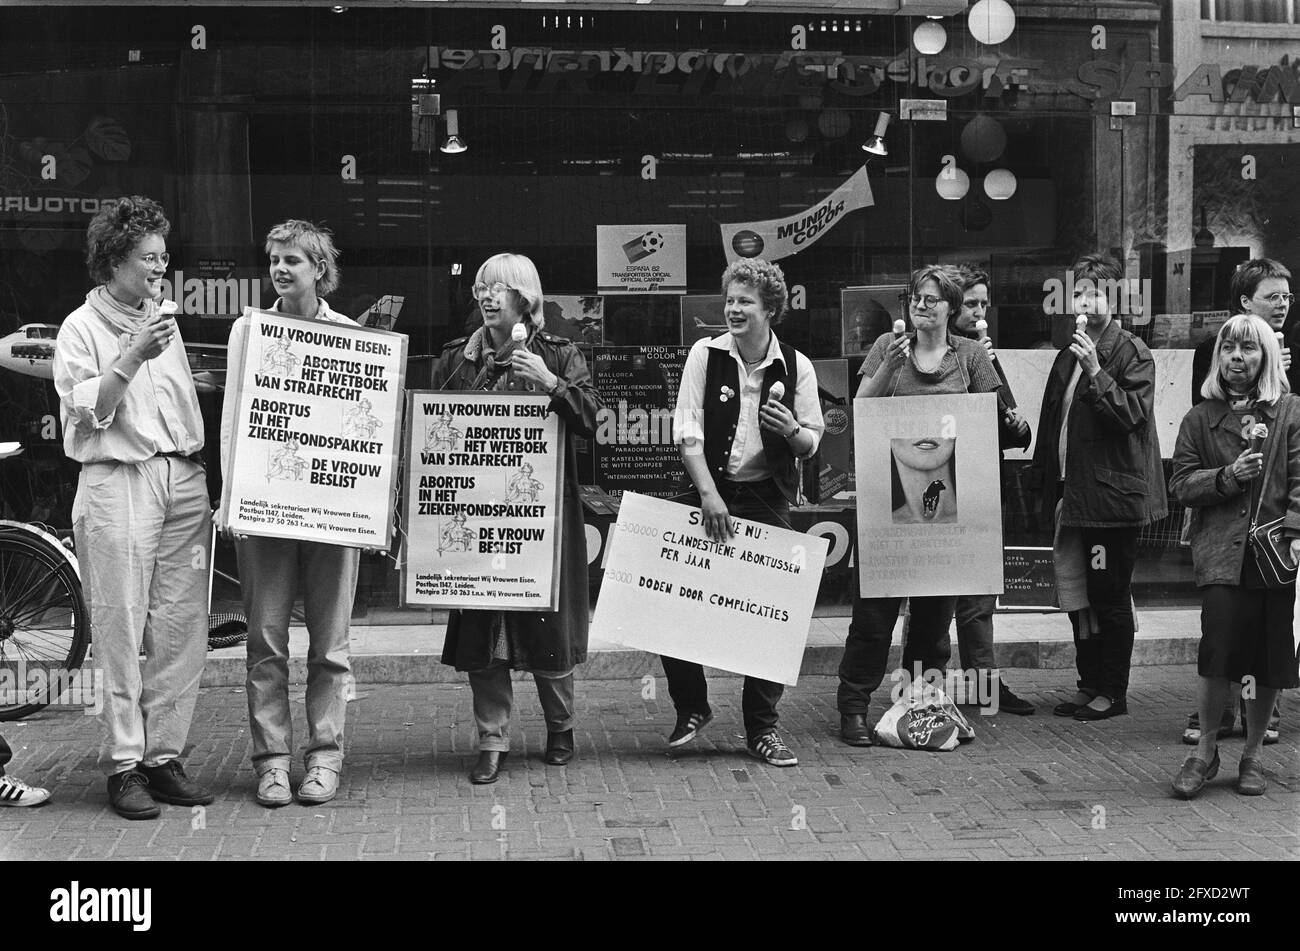 Picket-line by Wij Vrouwen Eisen in Leidsestraat in Amsterdam against abortion processes in Spain, April 2, 1982, demonstrations, The Netherlands, 20th century press agency photo, news to remember, documentary, historic photography 1945-1990, visual stories, human history of the Twentieth Century, capturing moments in time Stock Photo